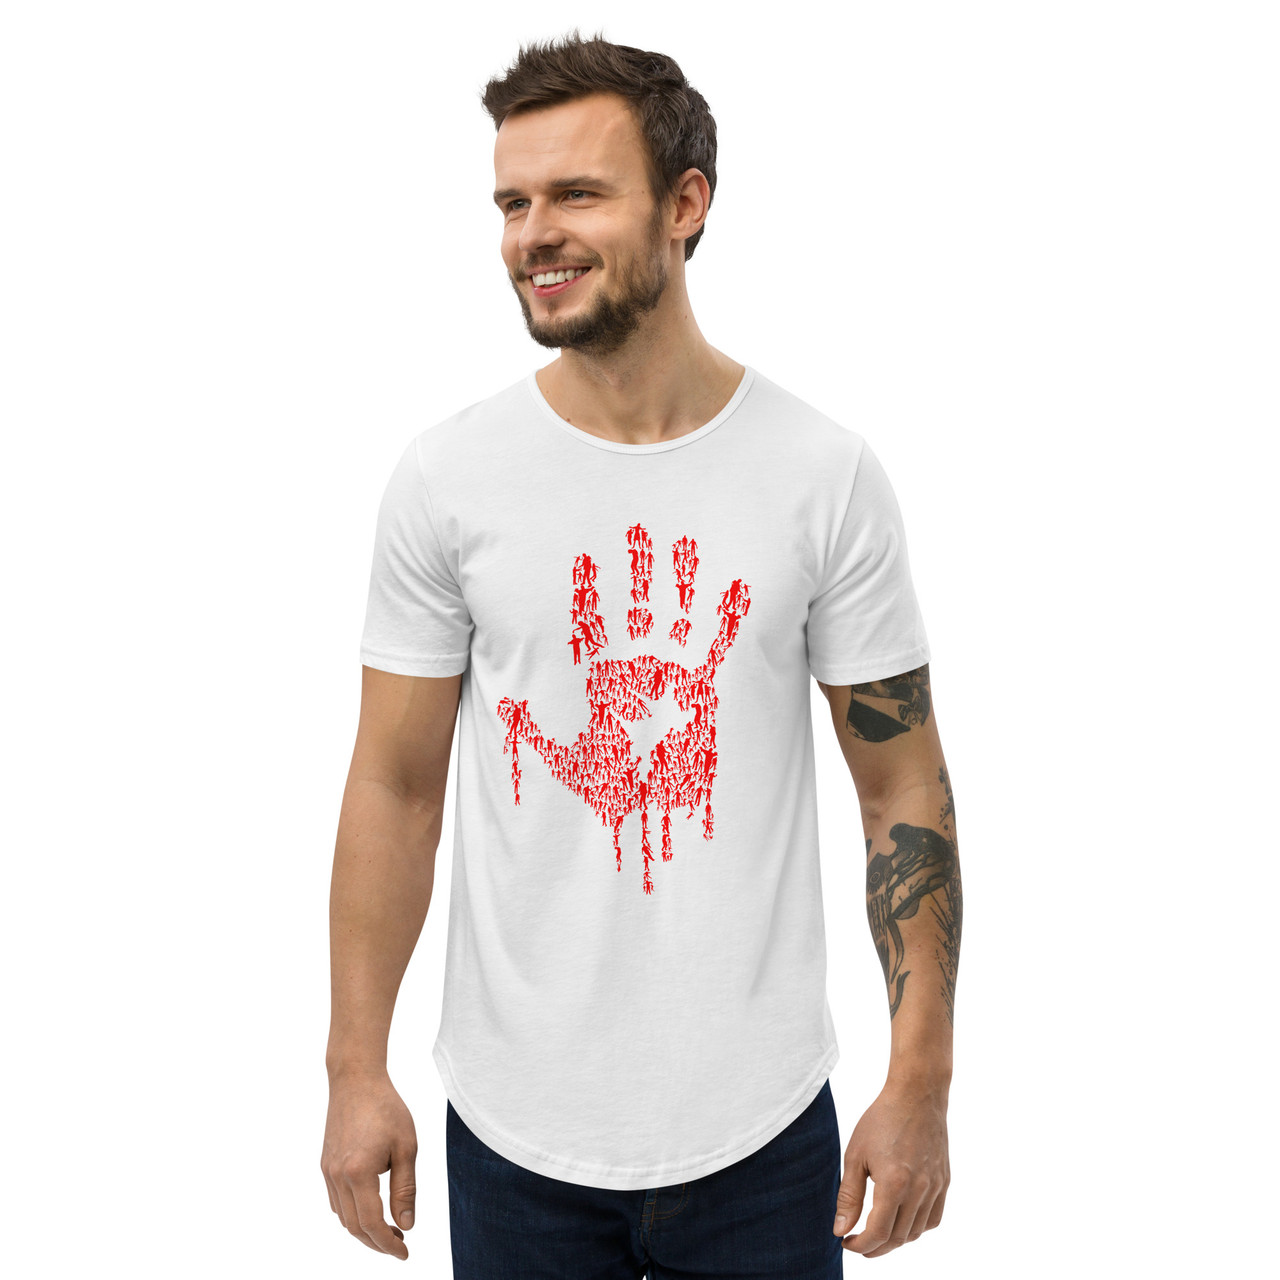 Hand of Zombies Curved Hem Tee - Bella + Canvas 3003 